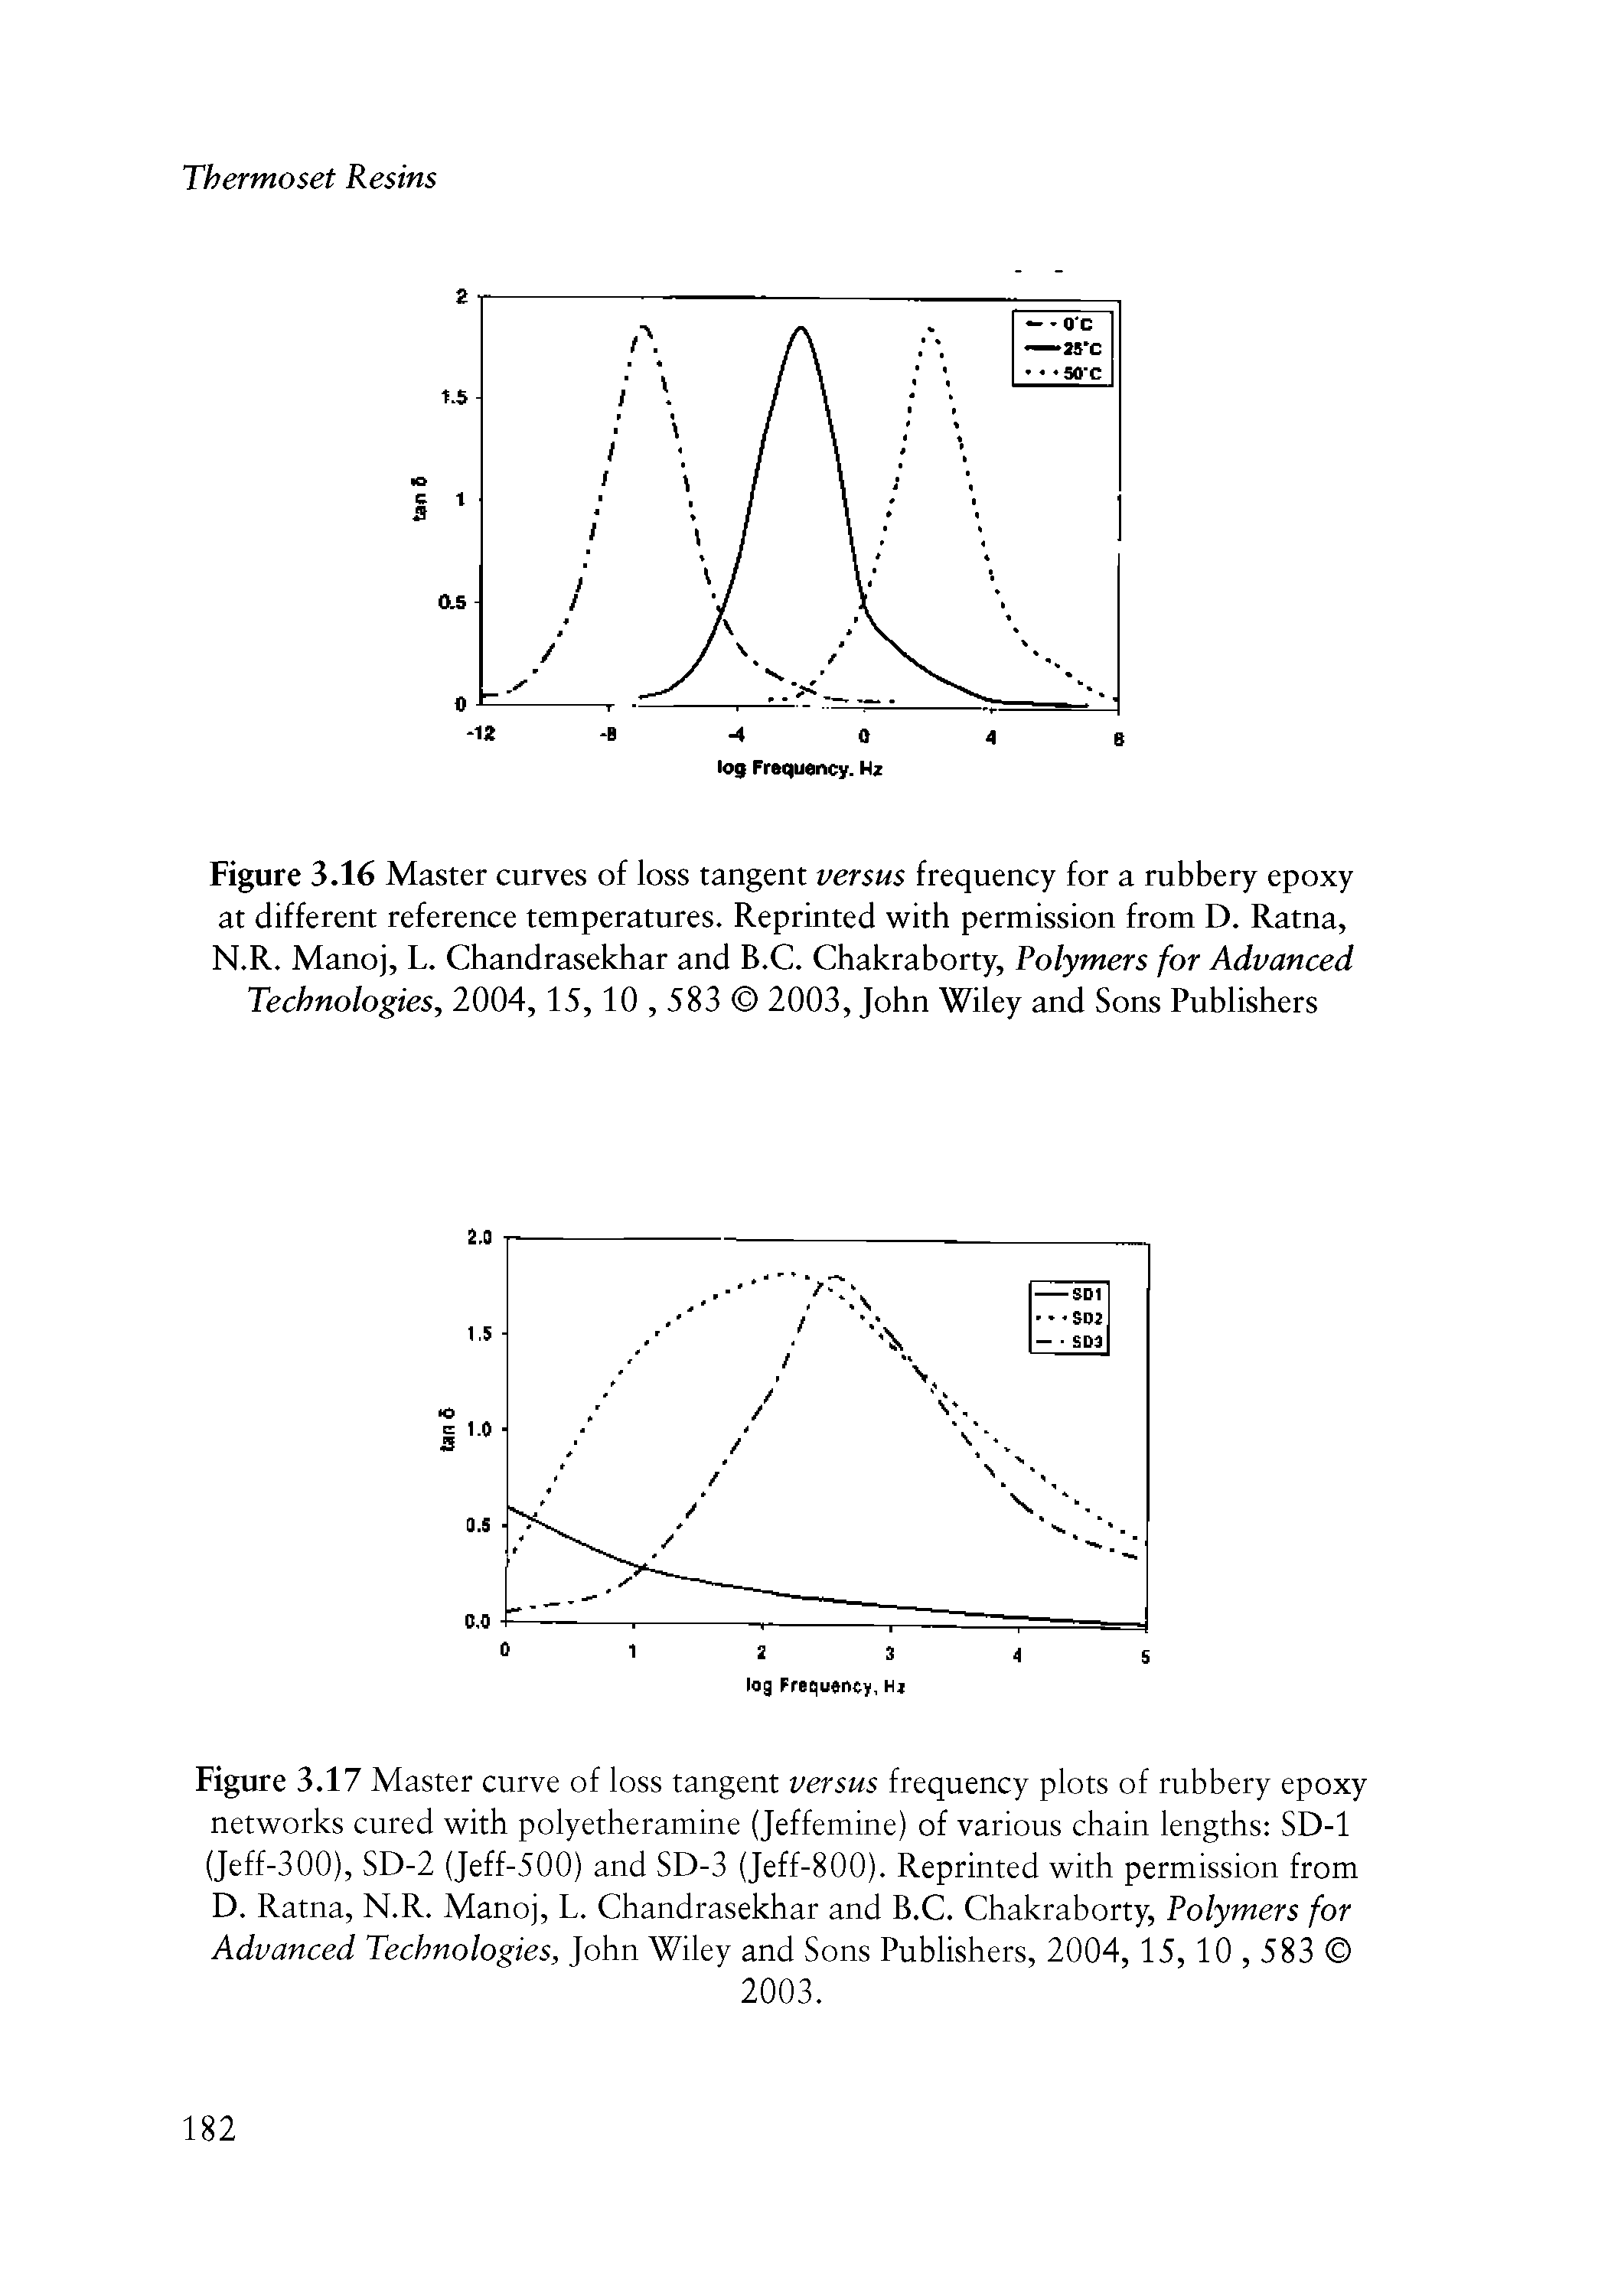 Figure 3.17 Master curve of loss tangent versus frequency plots of rubbery epoxy networks cured with polyetheramine (Jeffemine) of various chain lengths SD-1 (Jeff-300), SD-2 (Jeff-500) and SD-3 (Jeff-800). Reprinted with permission from D. Ratna, N.R. Manoj, L. Chandrasekhar and B.C. Chakraborty, Polymers for Advanced Technologies, John Wiley and Sons Publishers, 2004,15,10,583 ...